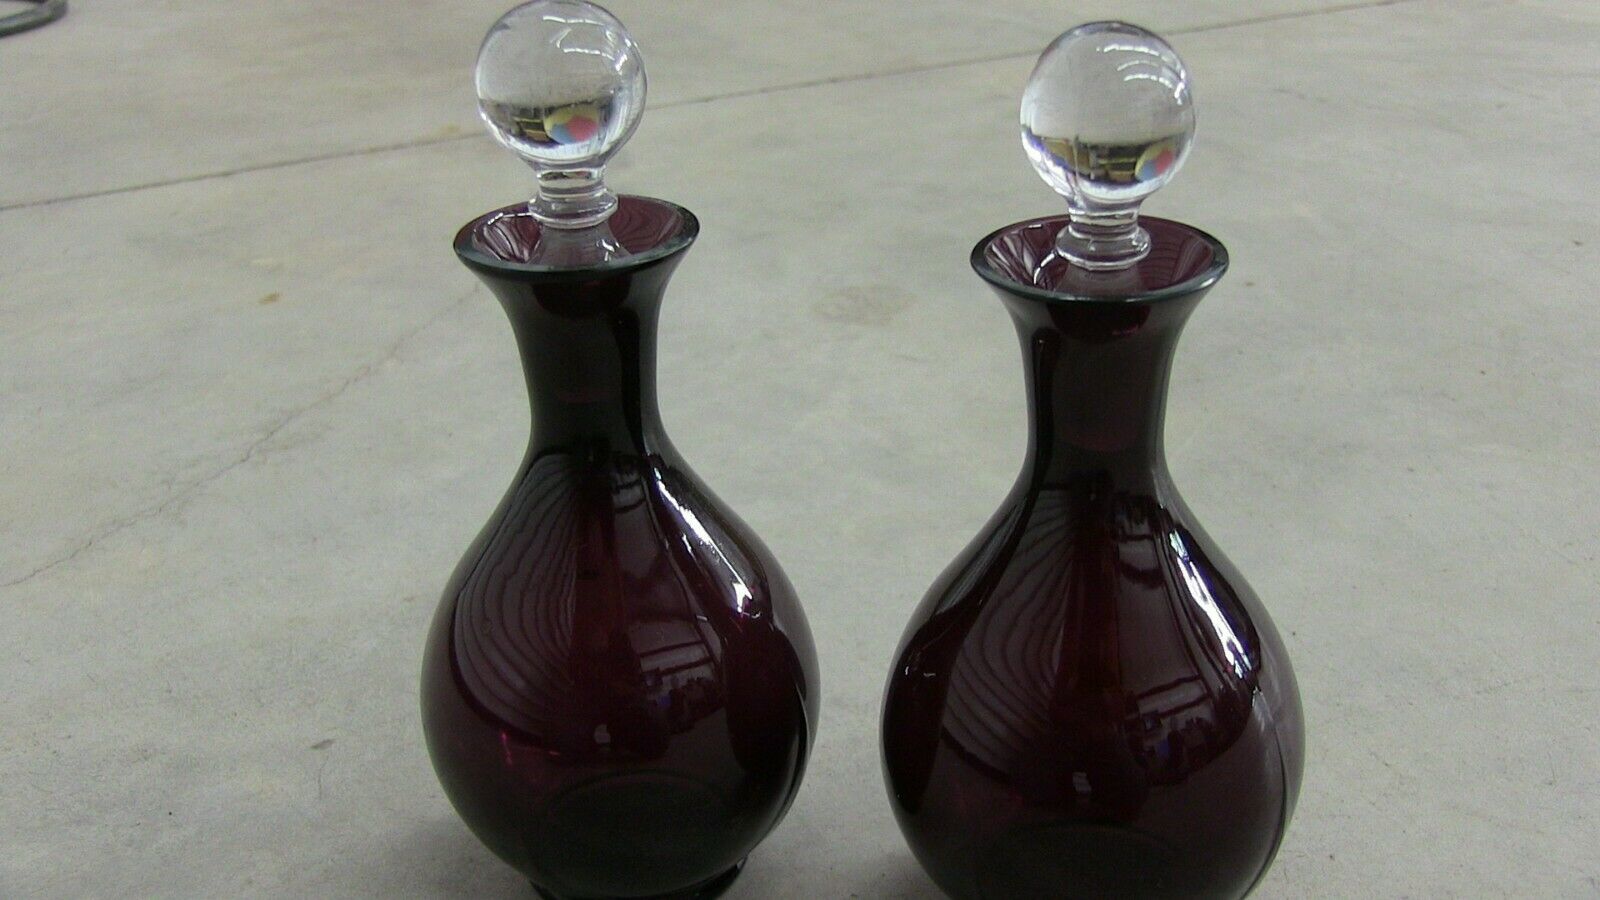 2 Vintage Amethyst Bottles W/ Crystal Stoppers 6.5" Tall X 3.5" Dia.